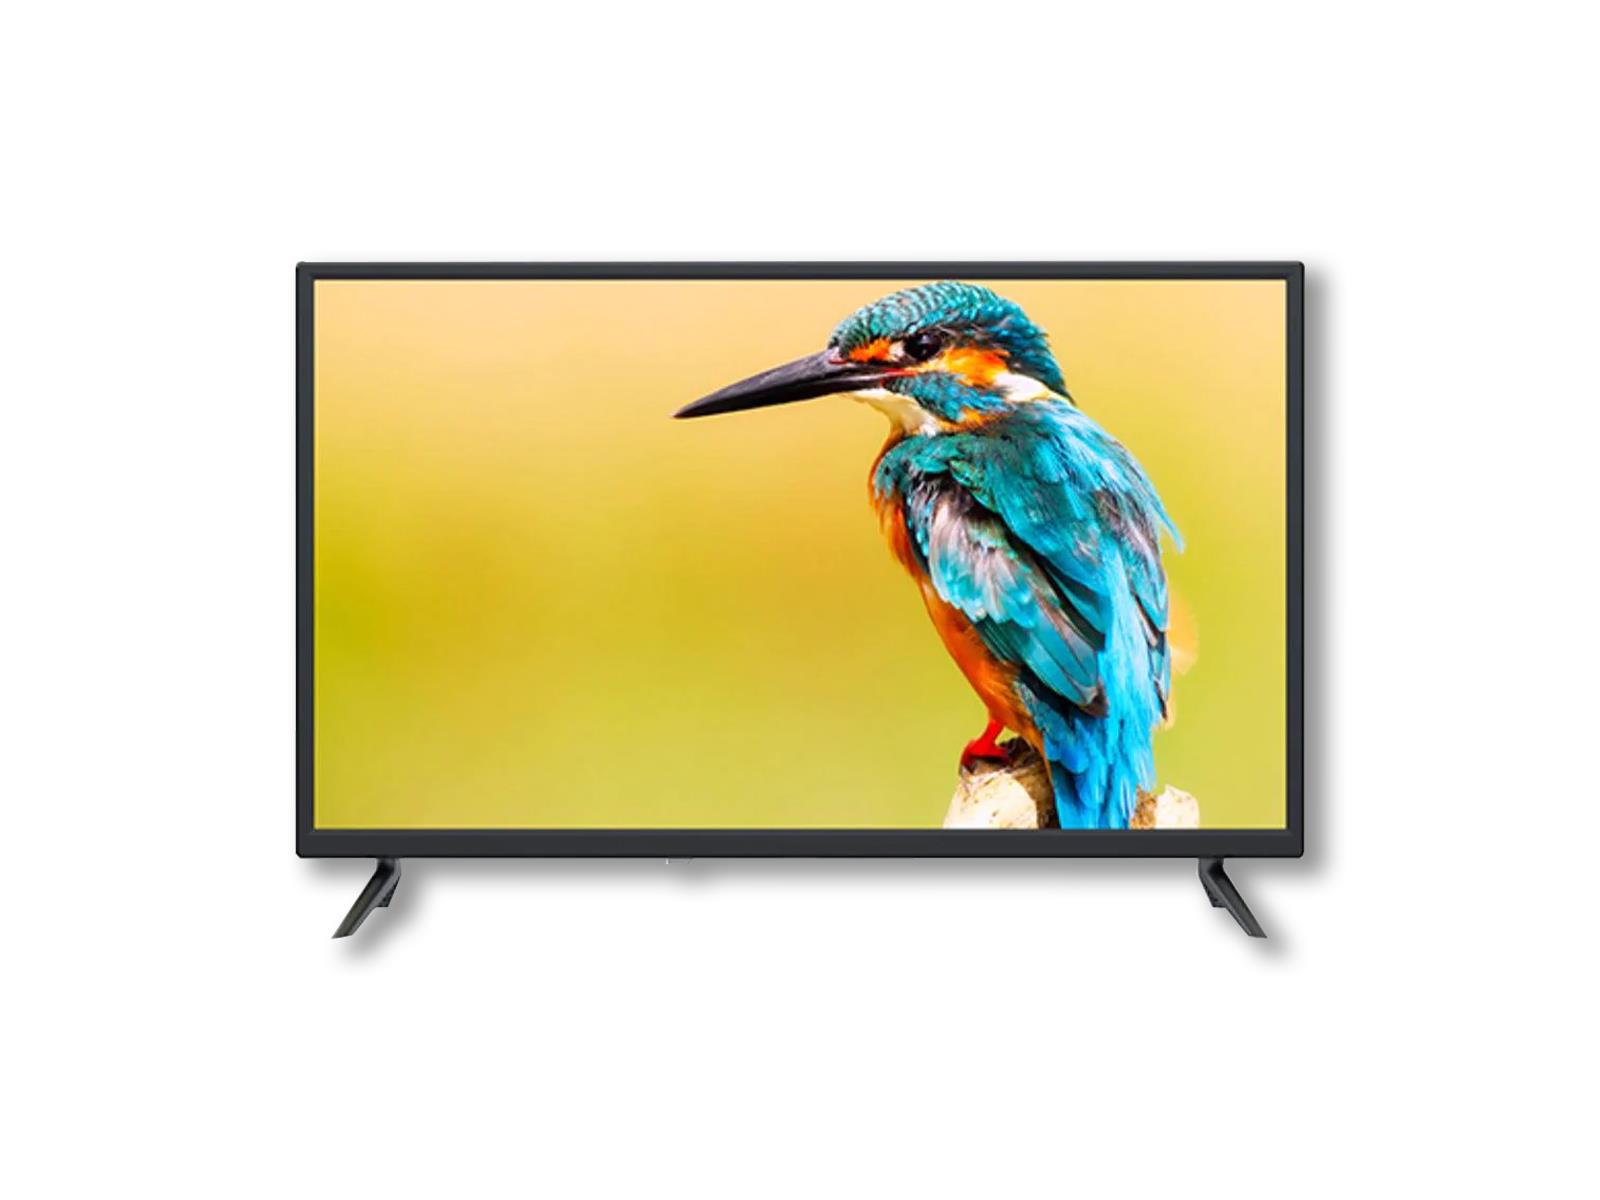 E-Star 32 Inch LED TV Front